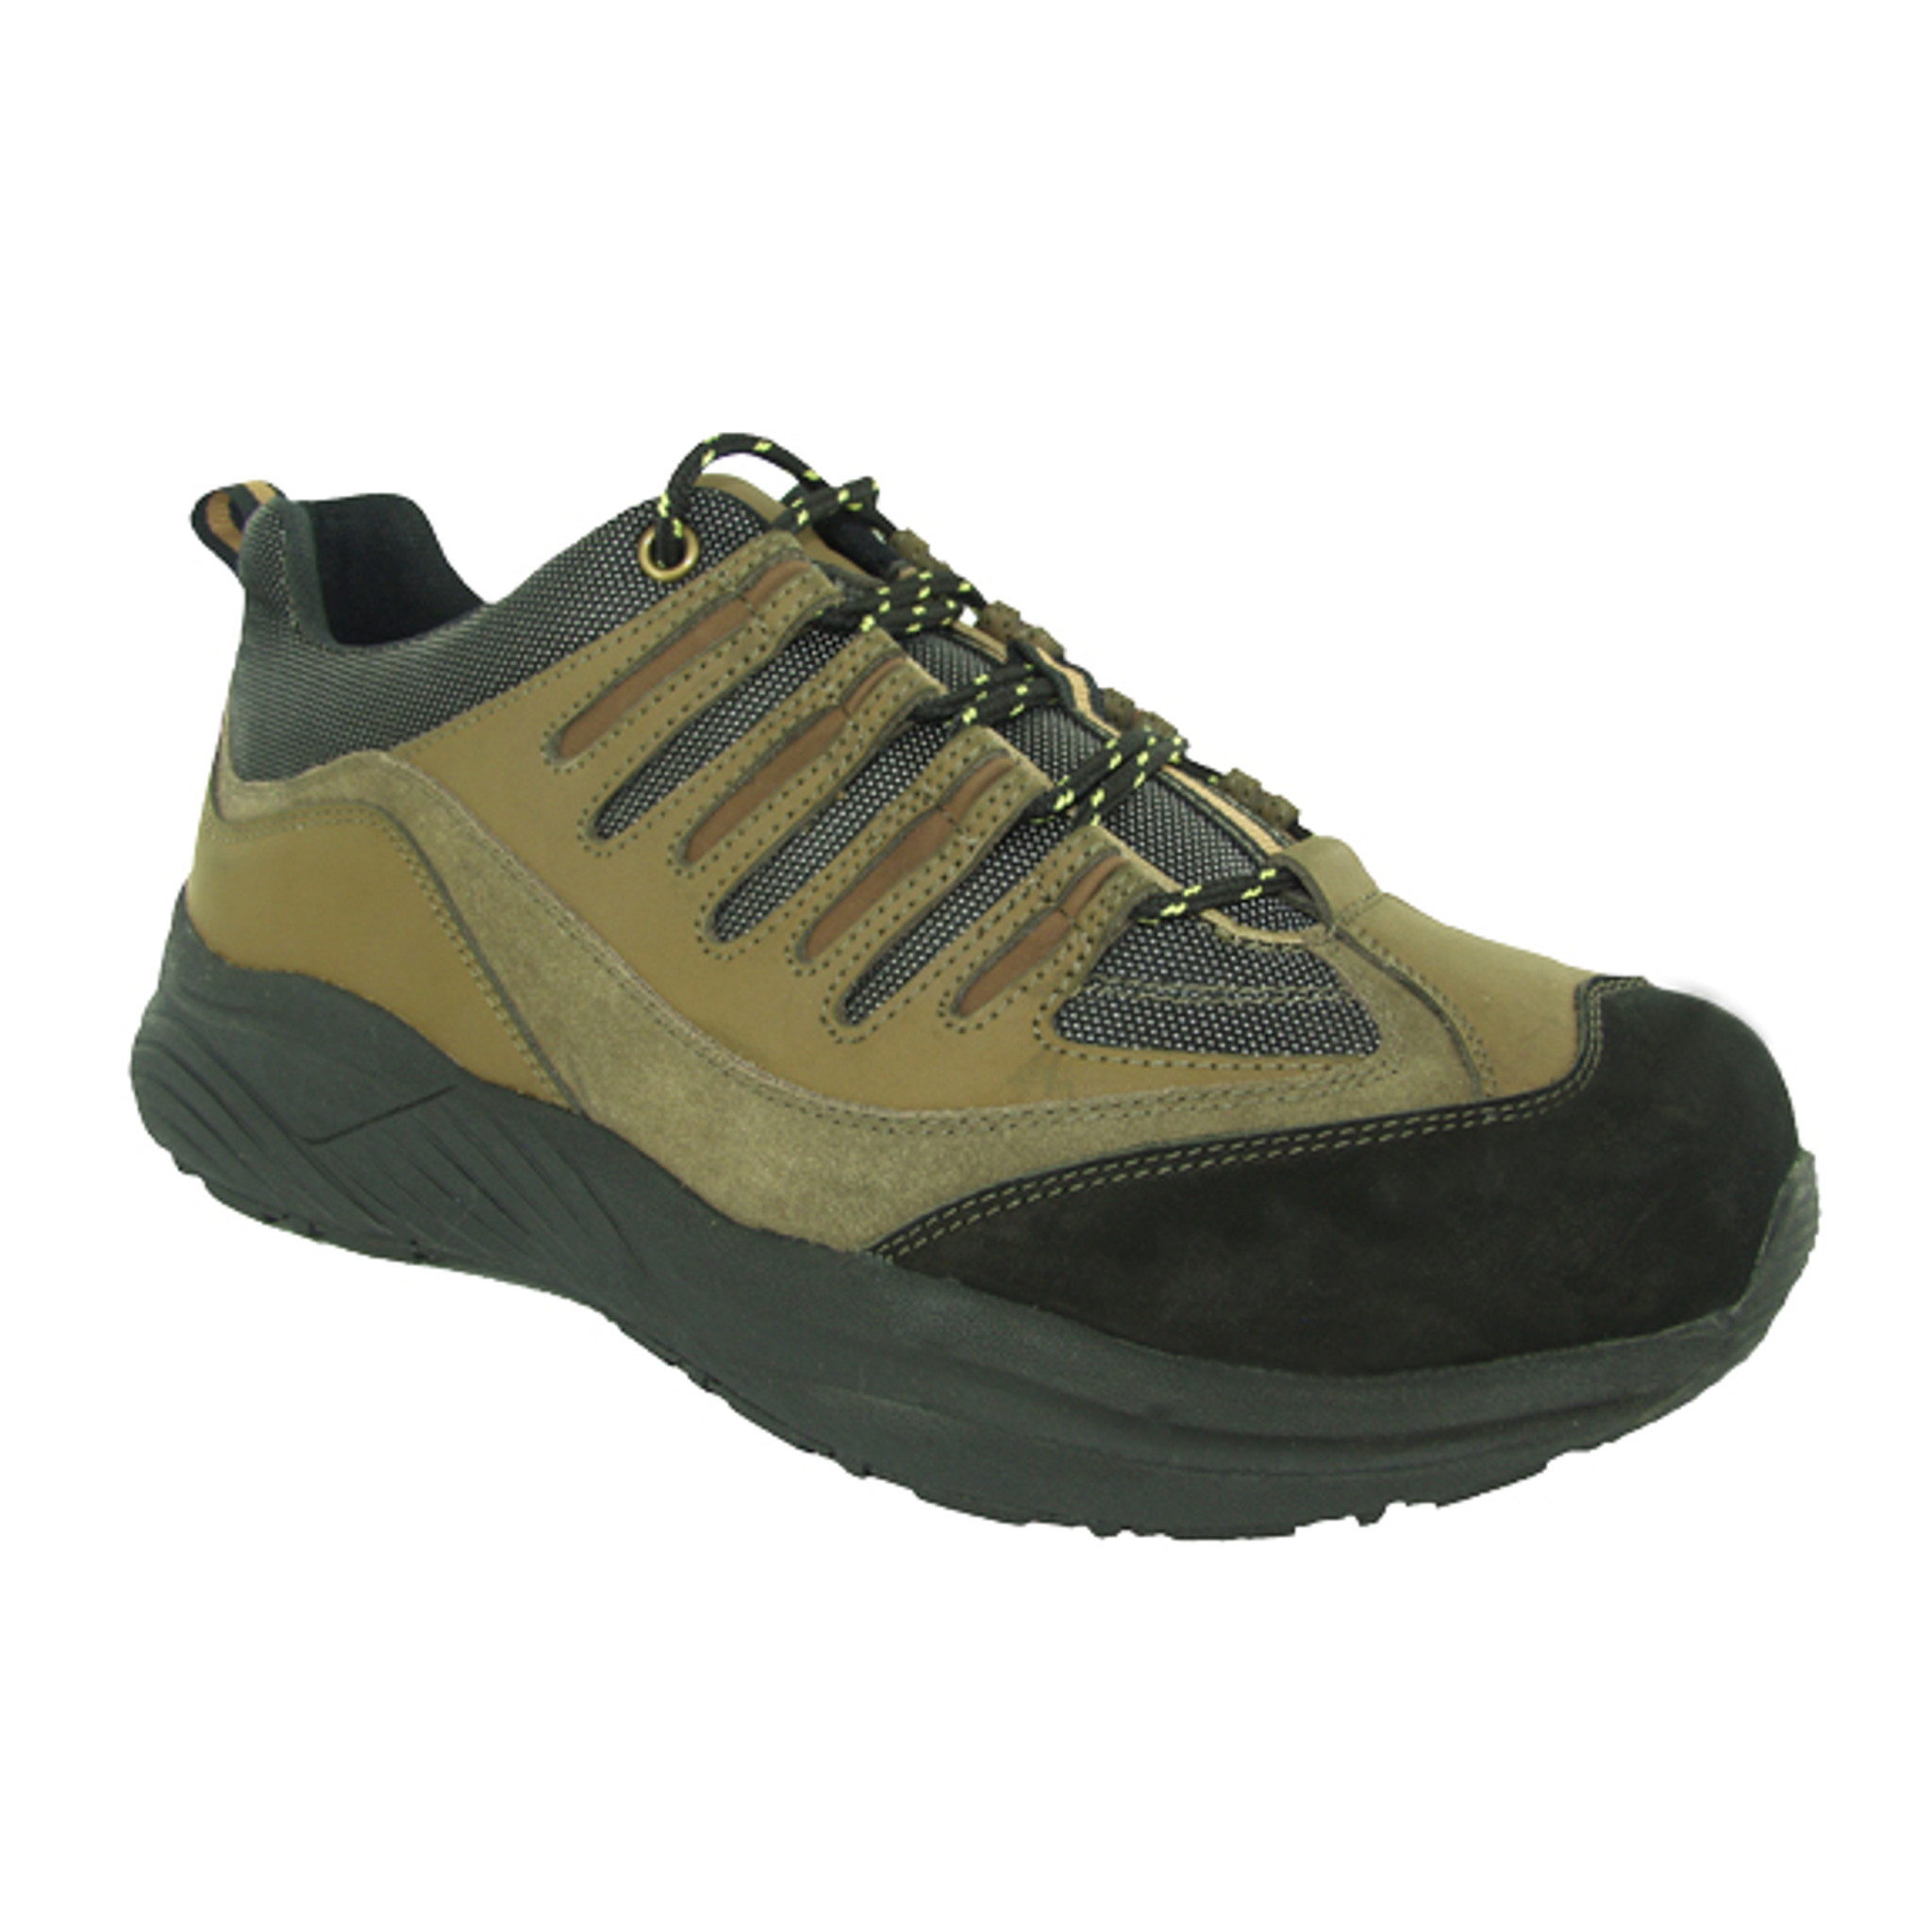 Orthopedic Shoes For Hiking Brown 